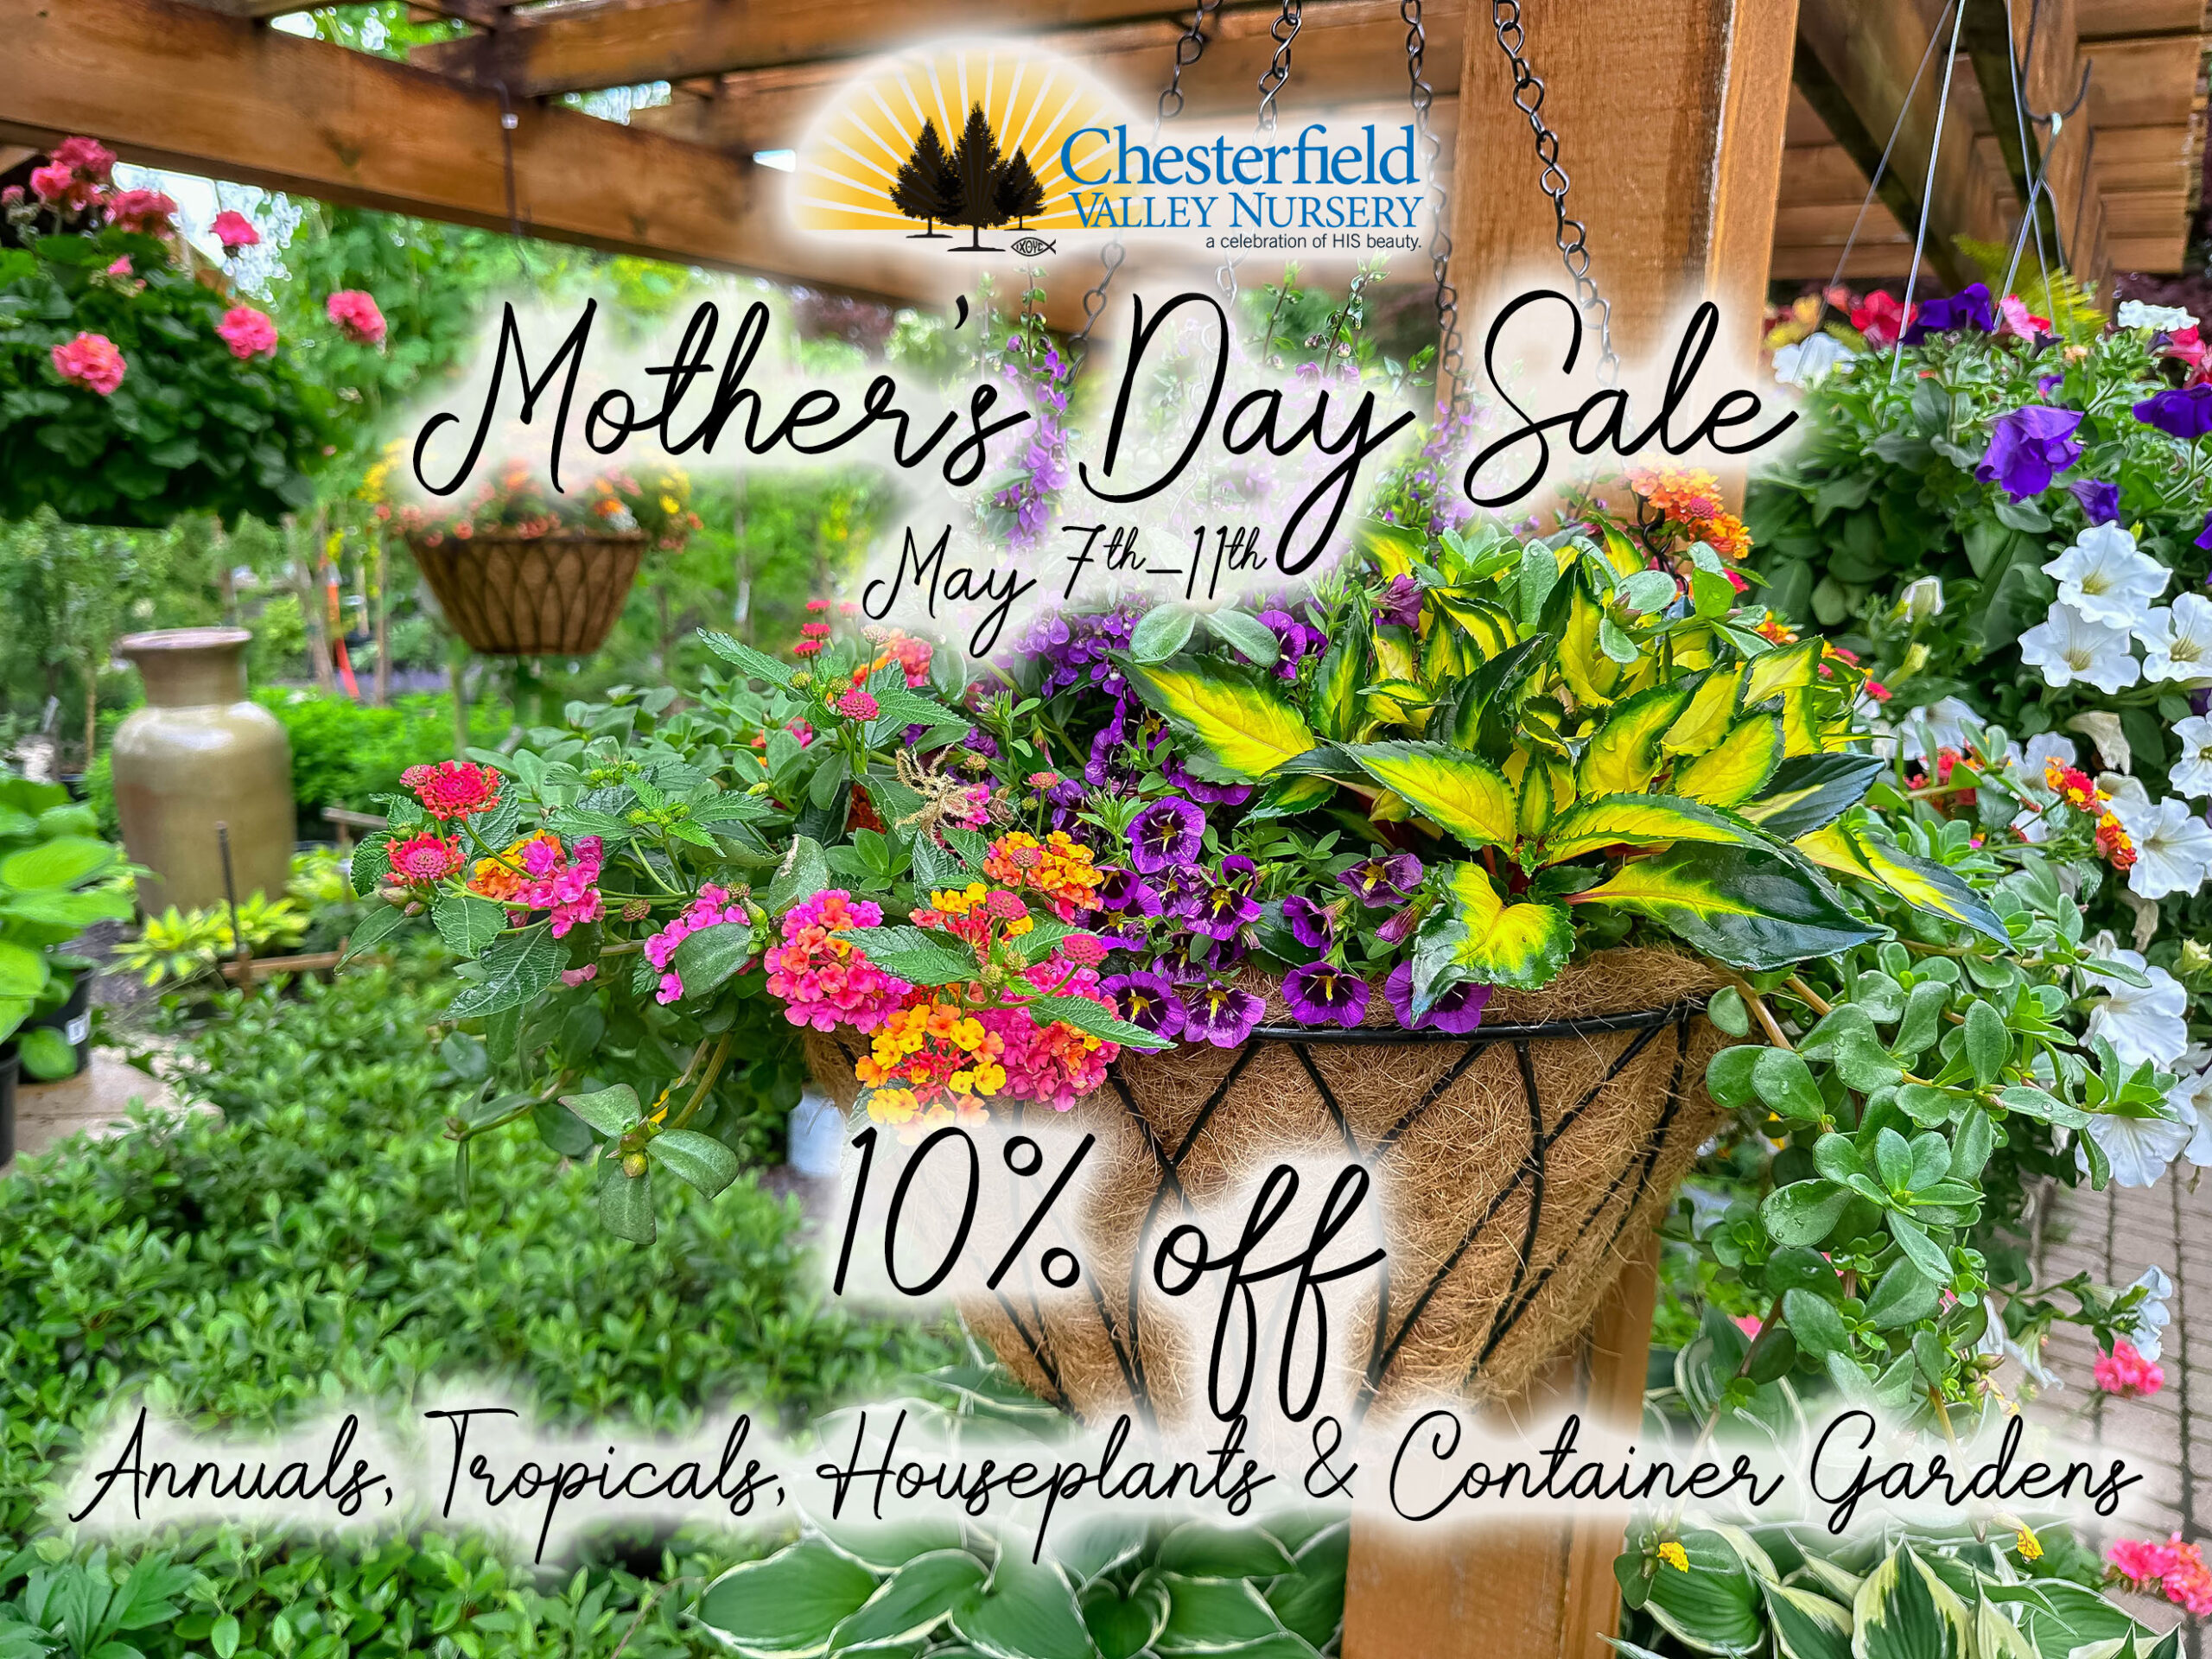 Mother's day sale, May 7-11, 10% off annuals, tropicals, houseplants, and container gardens